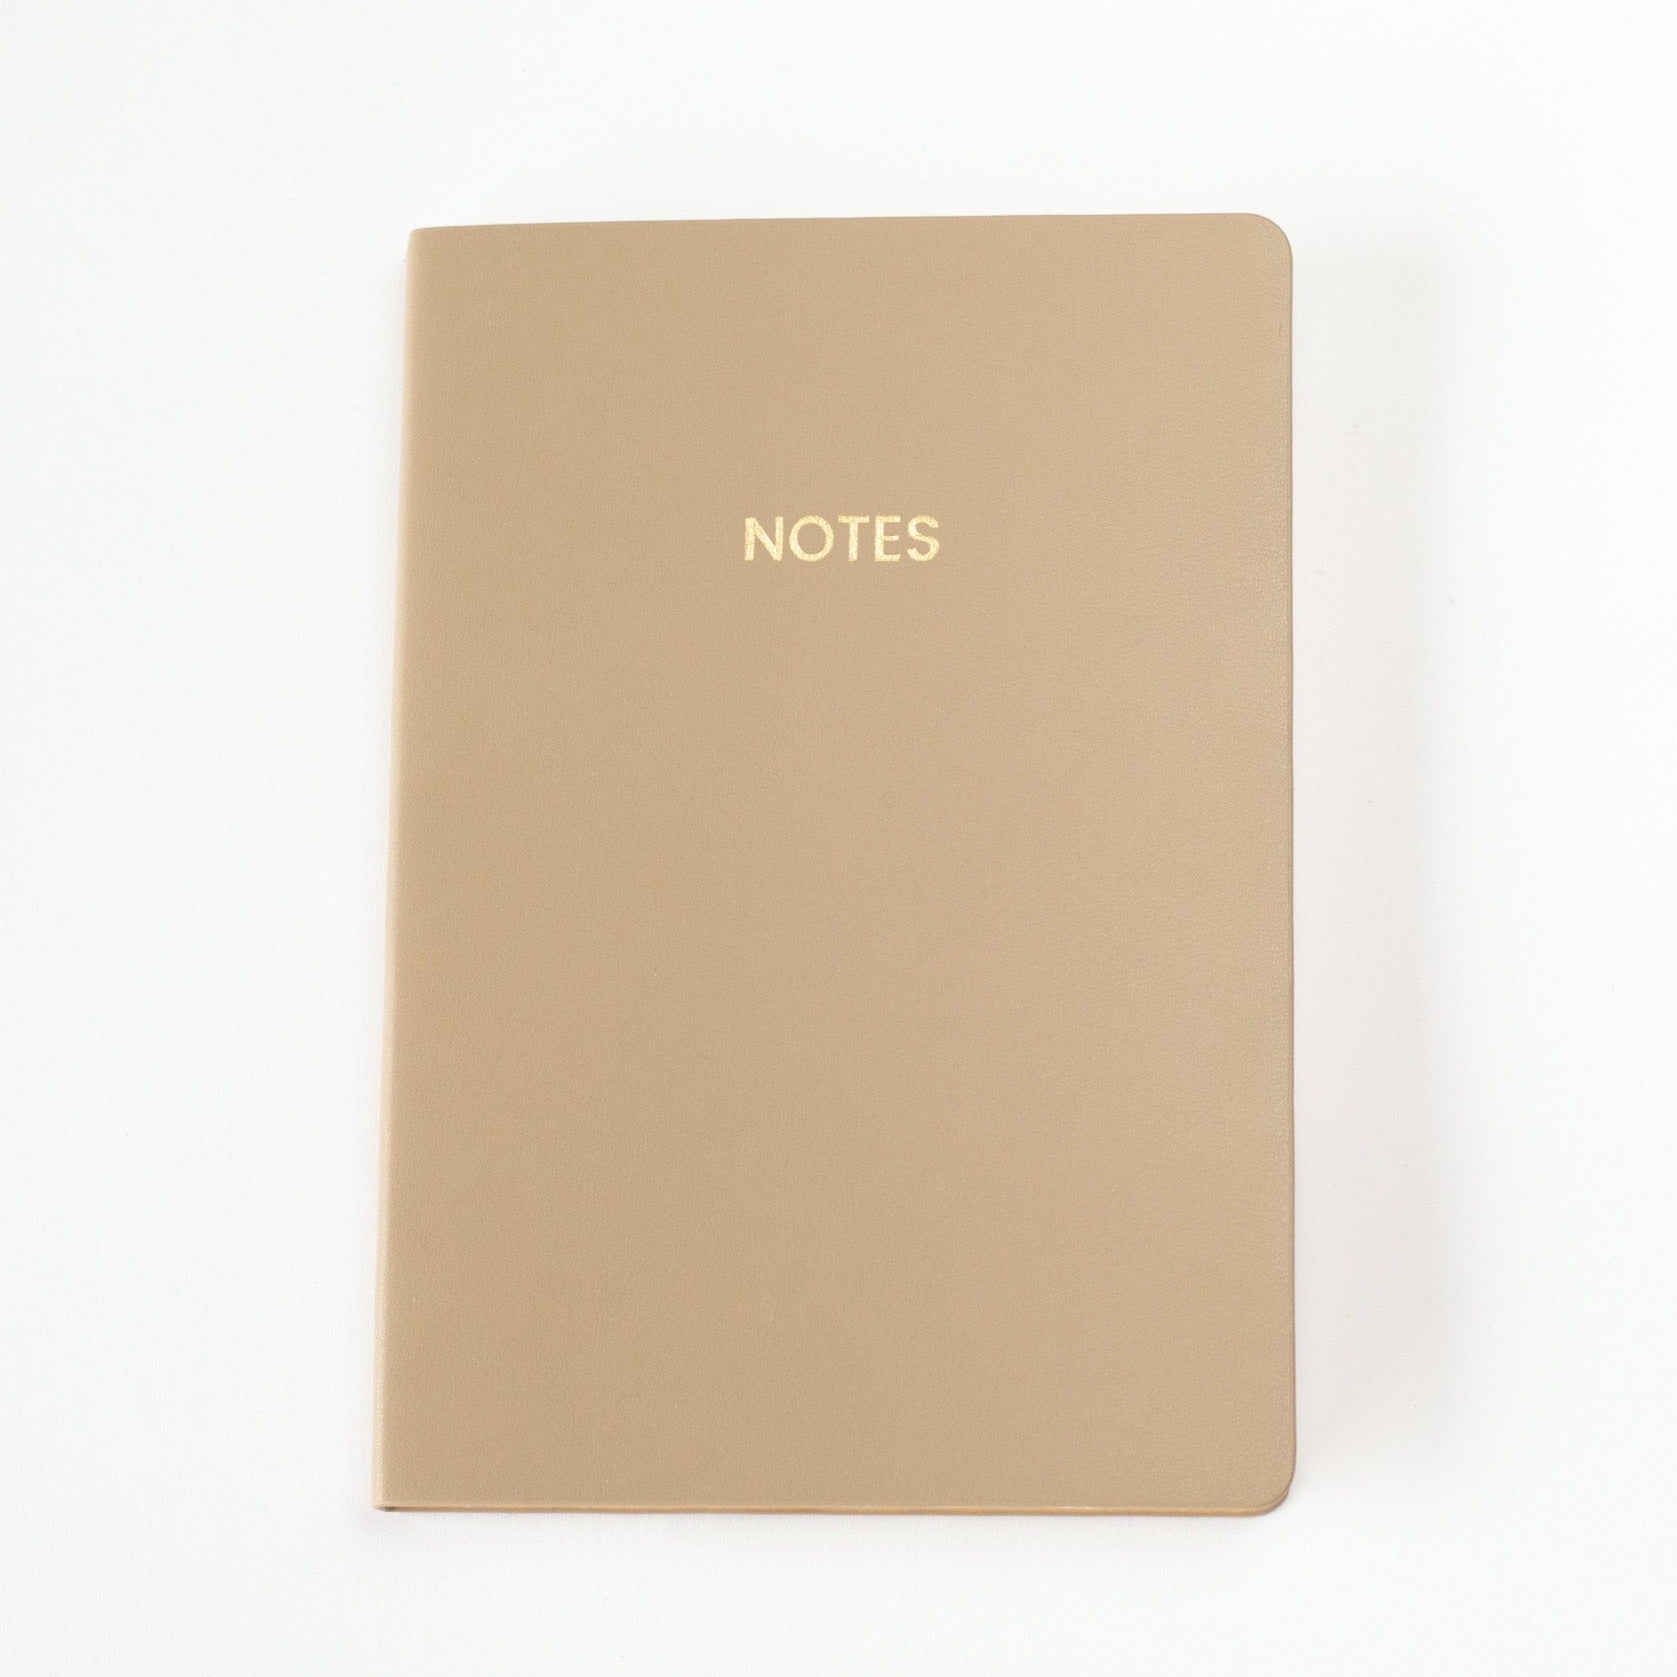 A light brown colored vegan leather notebook with gold foil text reading &quot;NOTES&quot; across the front photographed against a white background.